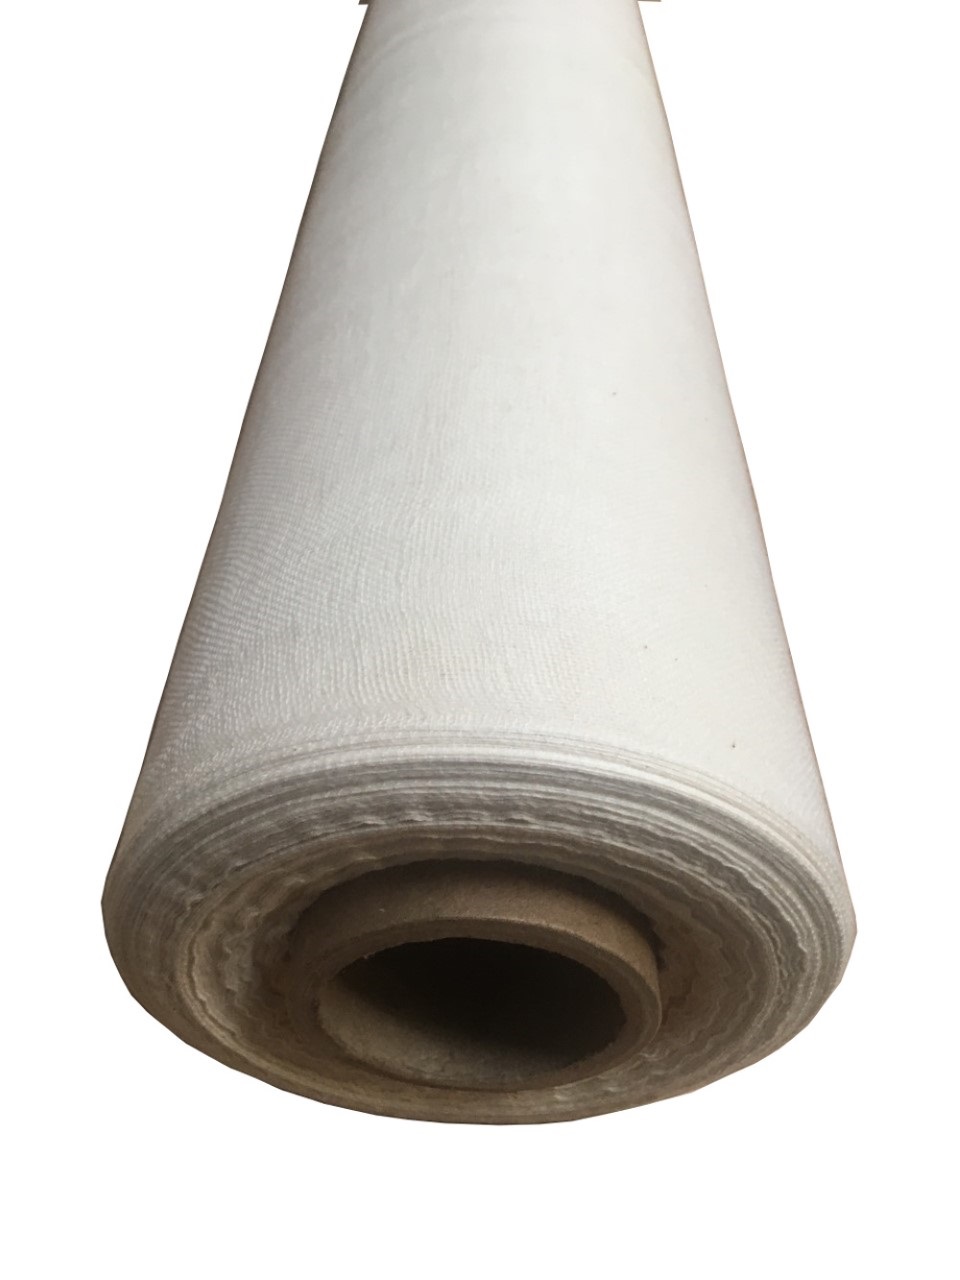 36" Wide Grade 60 Unbleached Cheesecloth Roll